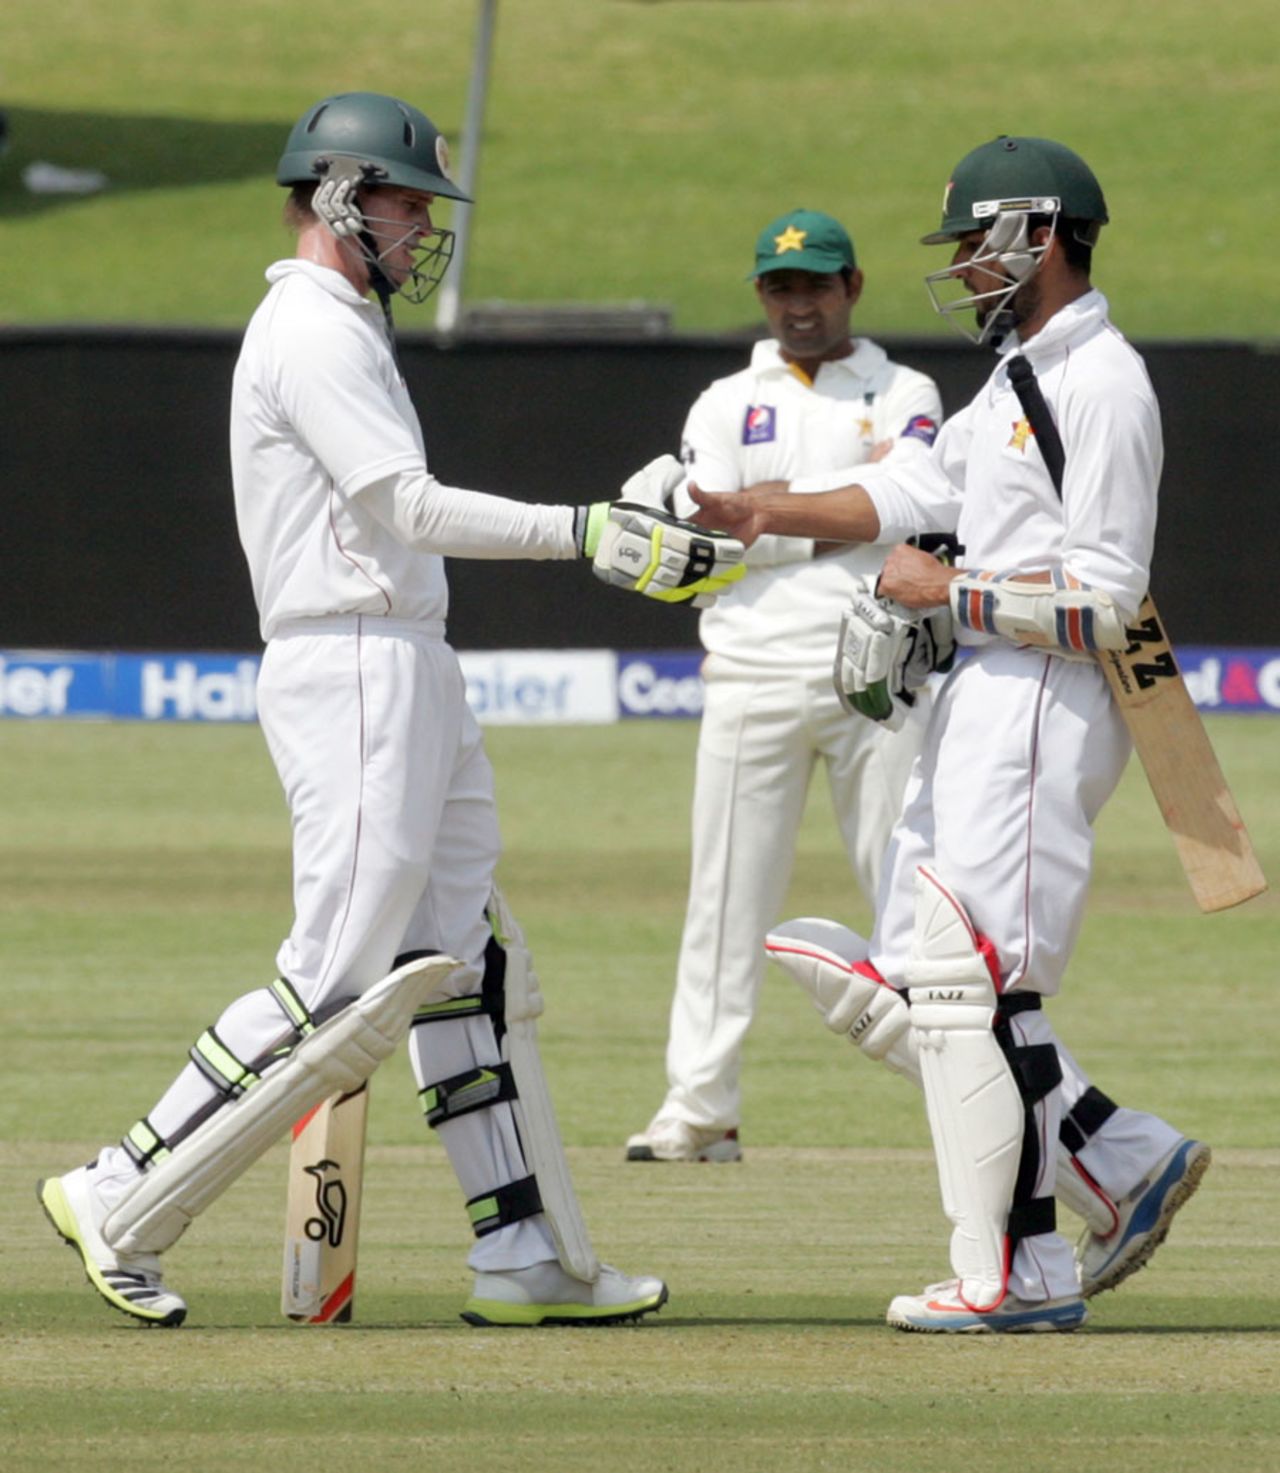 Sikandar Raza and Malcolm Waller shake hands during their fourth-wicket stand, Zimbabwe v Pakistan, 1st Test, Harare, 2nd day, September 4, 2013